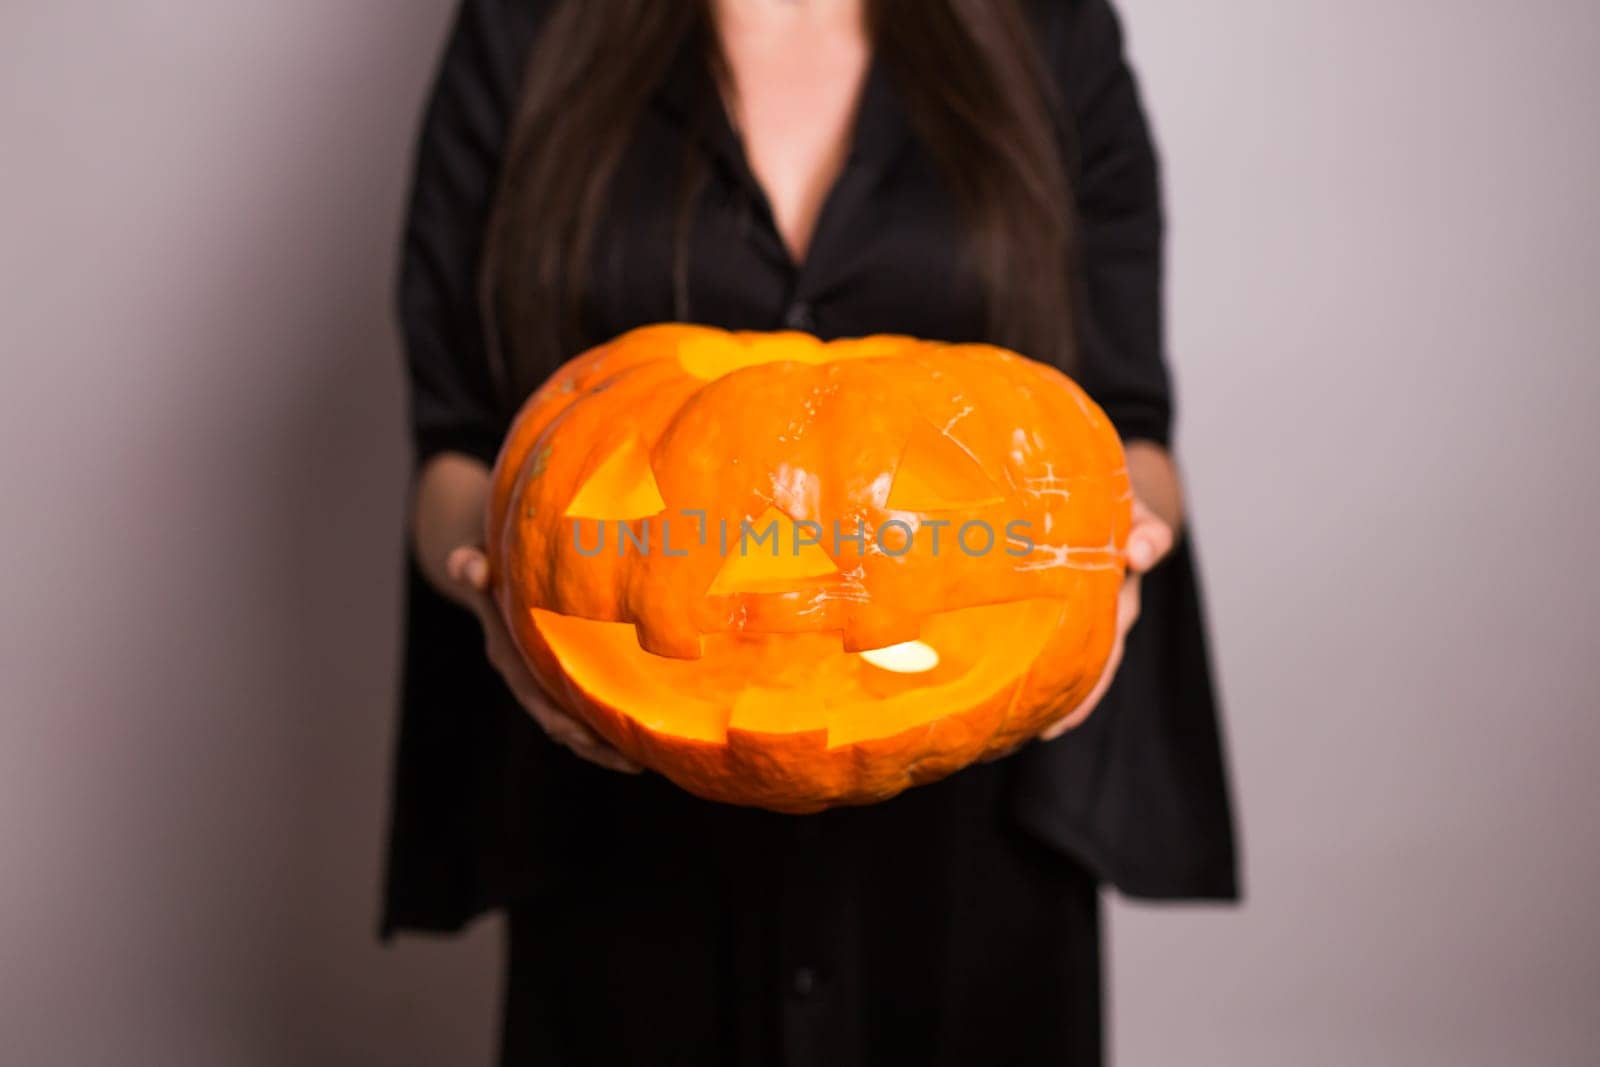 Jack o Lantern Halloween pumpkin grinning in the most evil fashion in woman's hands